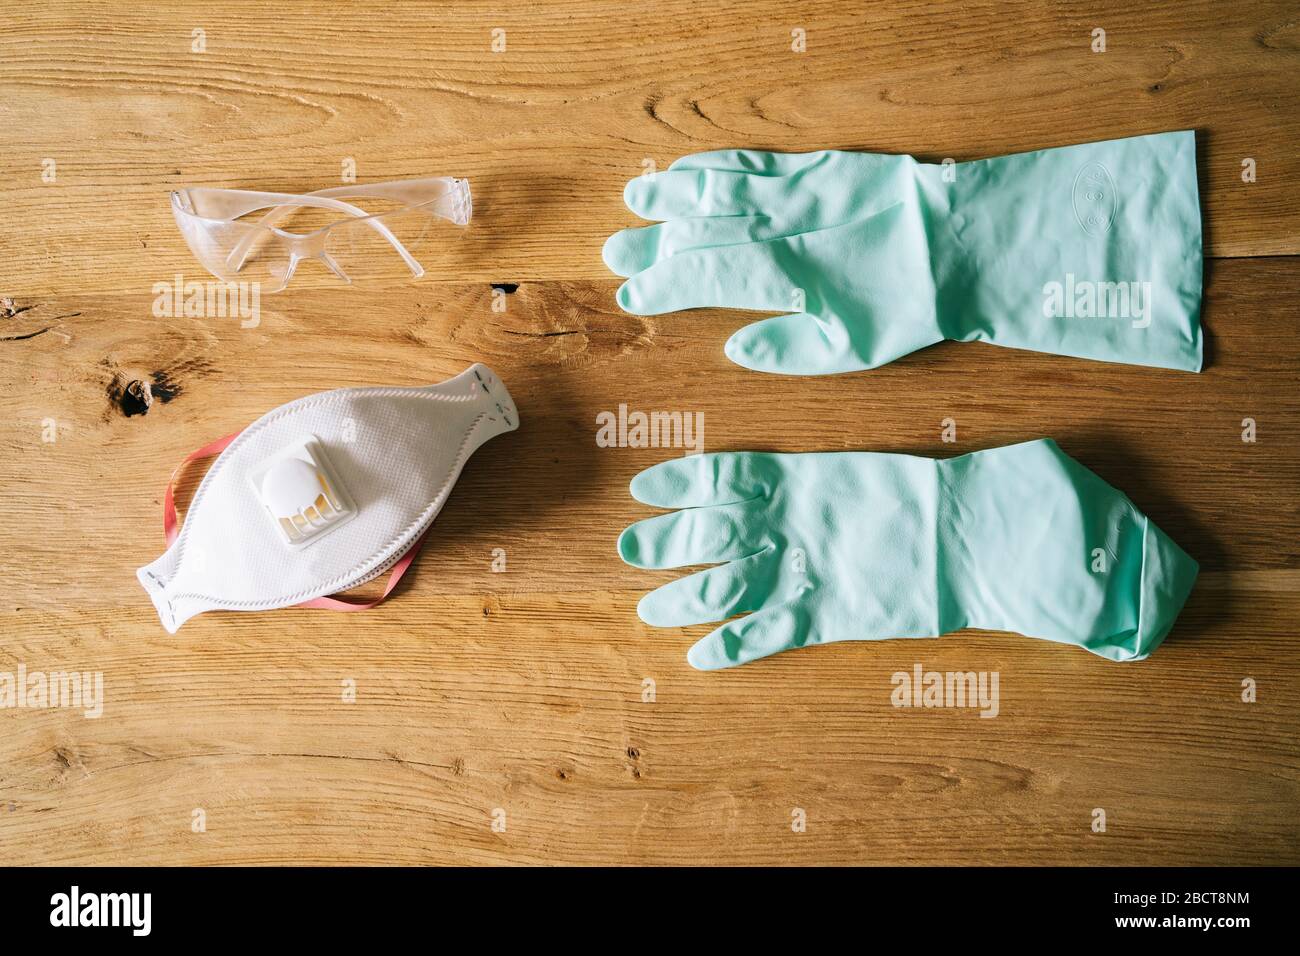 Protective and safety equipment on a wooden background Stock Photo